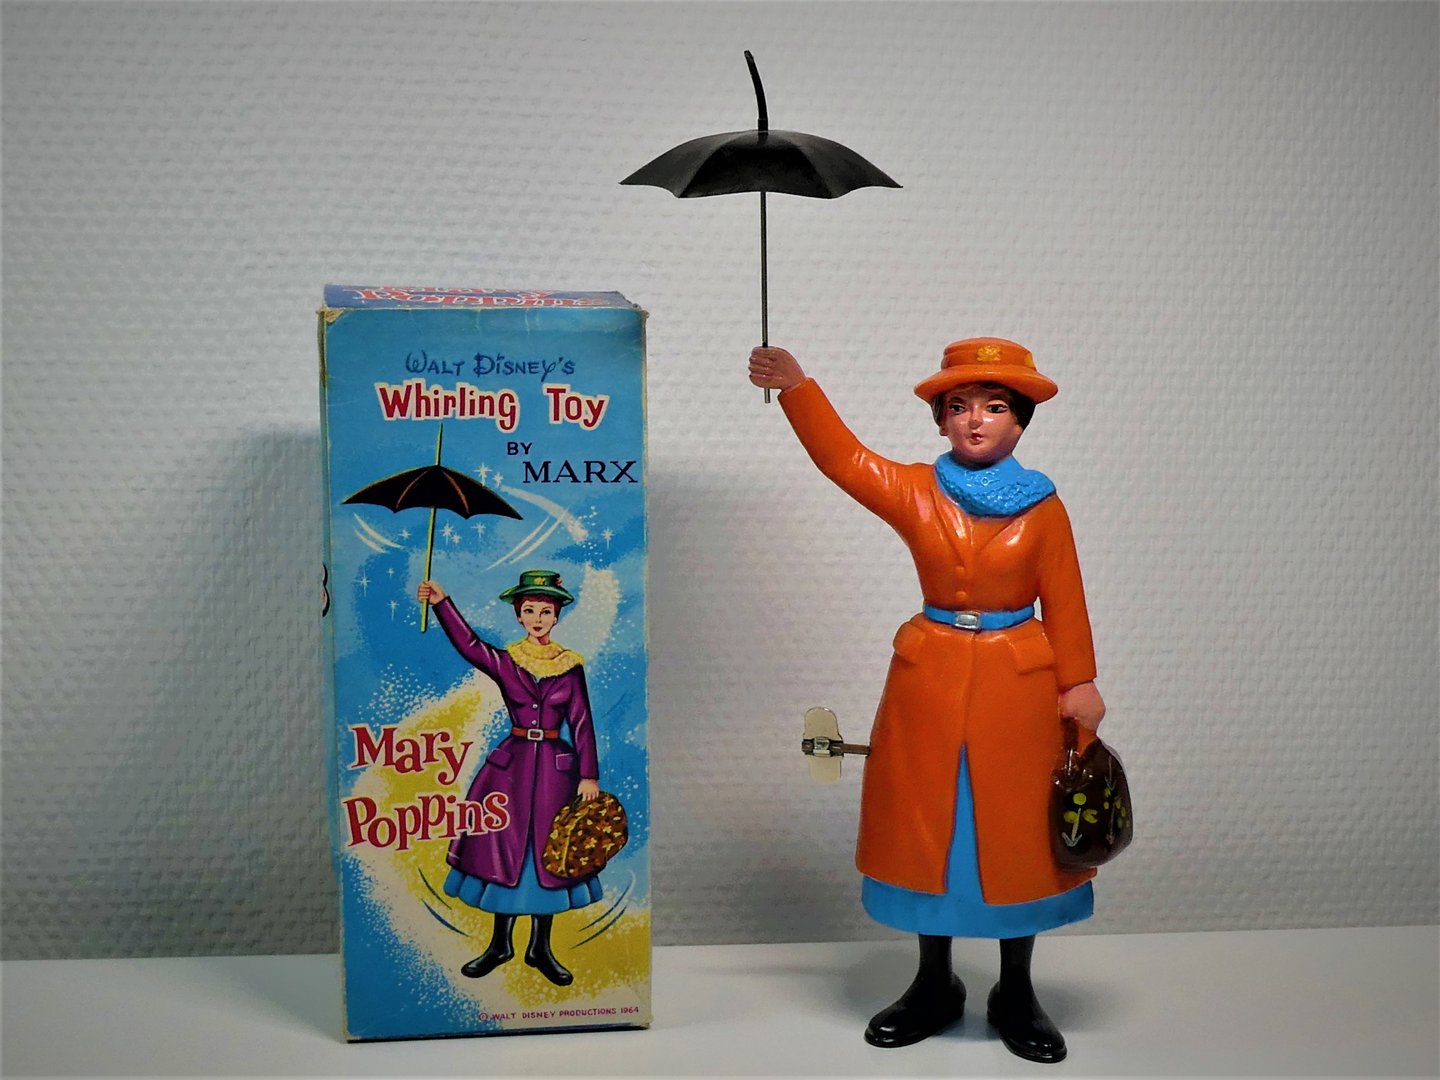 Louis Marx # 1964 Walt Disney "MARY POPPINS" Whirling Toy